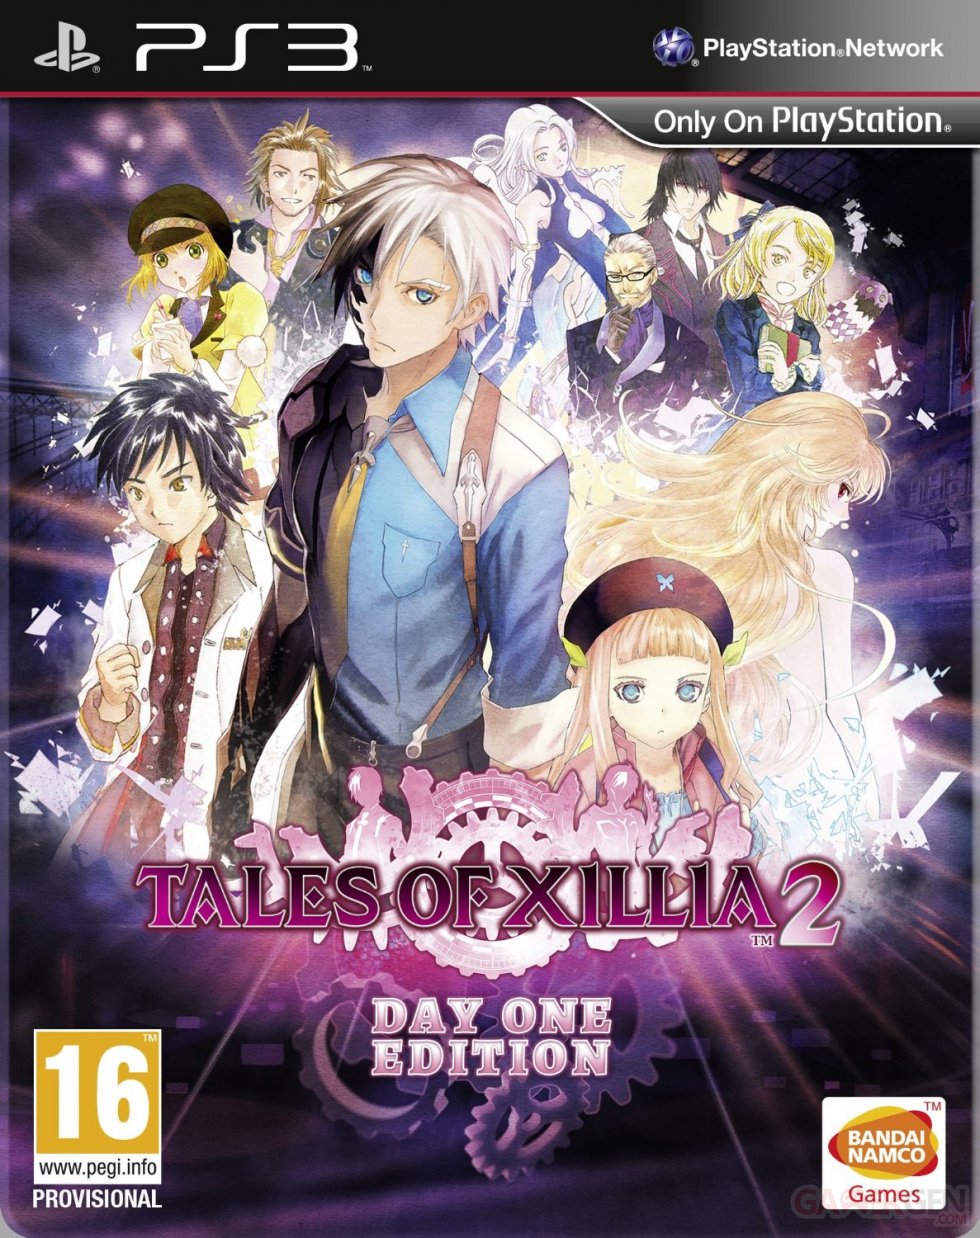 Tales of Xillia 2 édition day one PS3